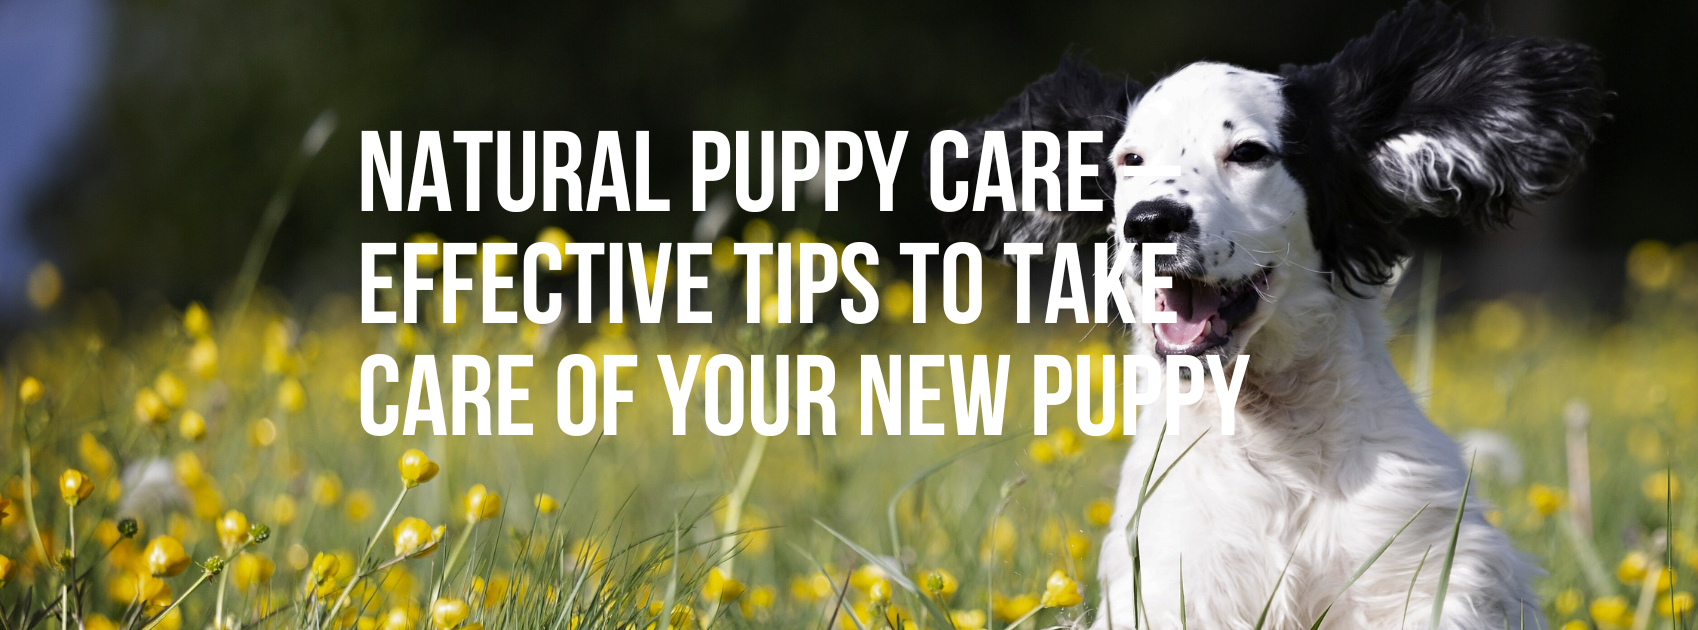 Natural Puppy Care – Effective Tips to Take Care of Your New Puppy